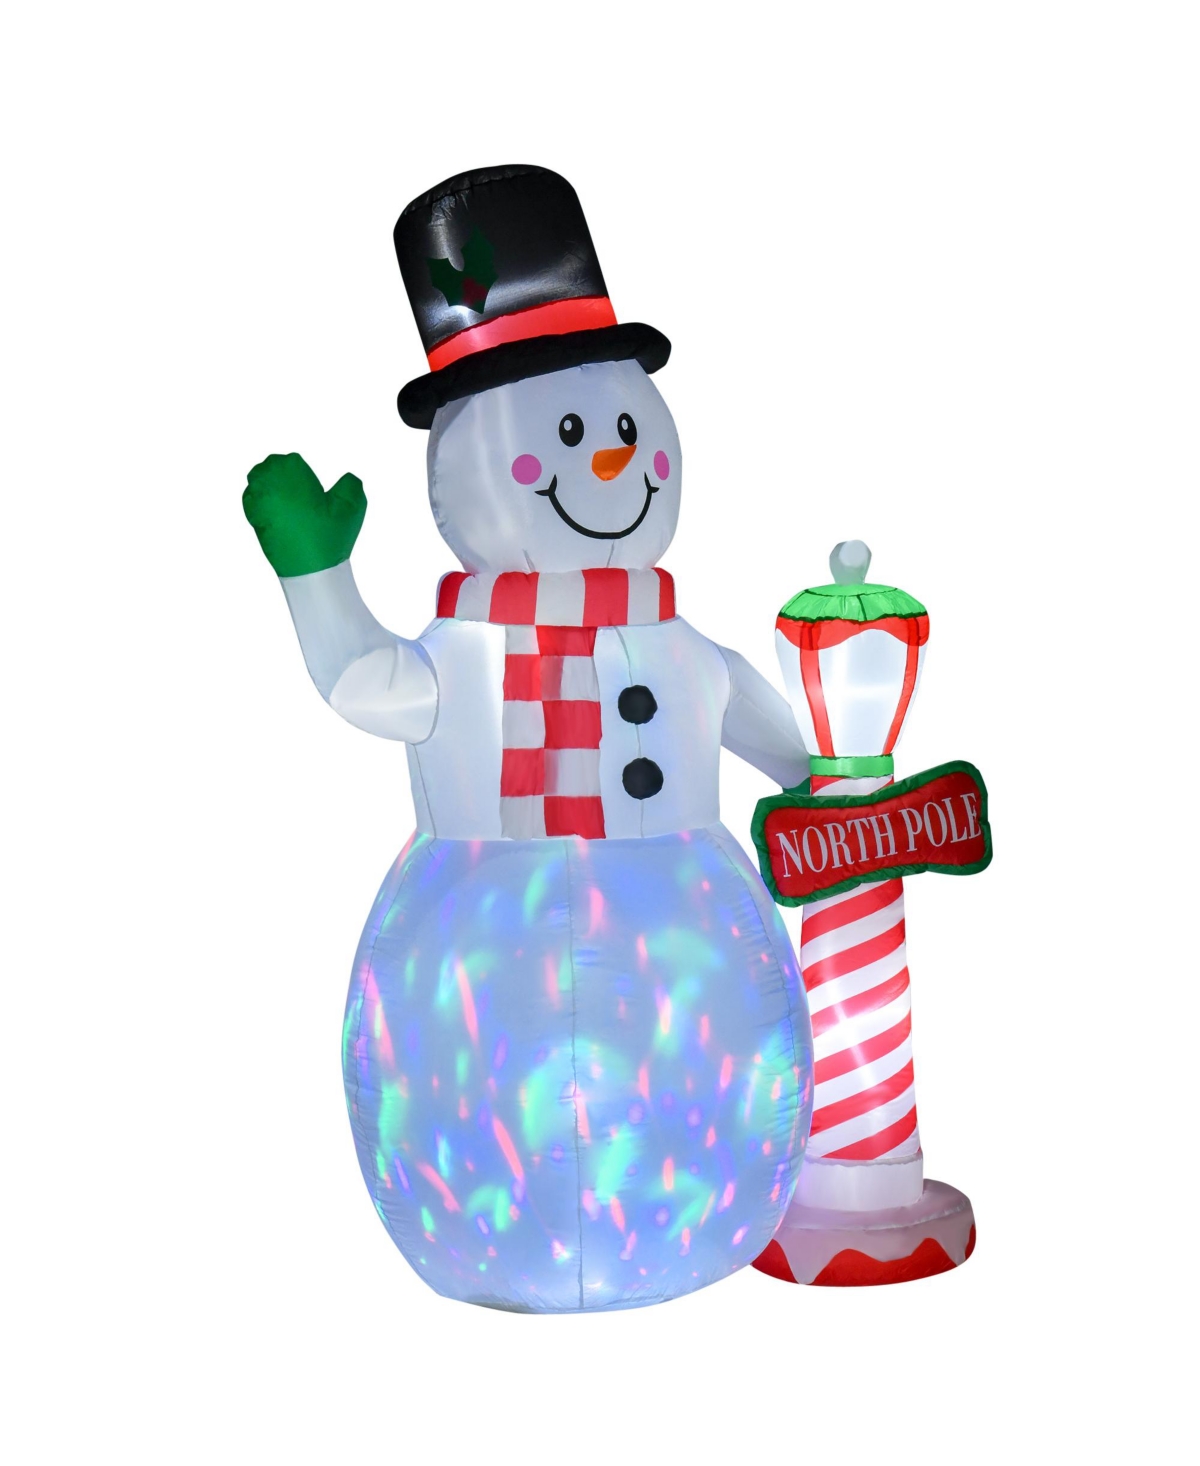 8' Christmas Inflatable Snowman Outdoor Blow-Up Decoration - White